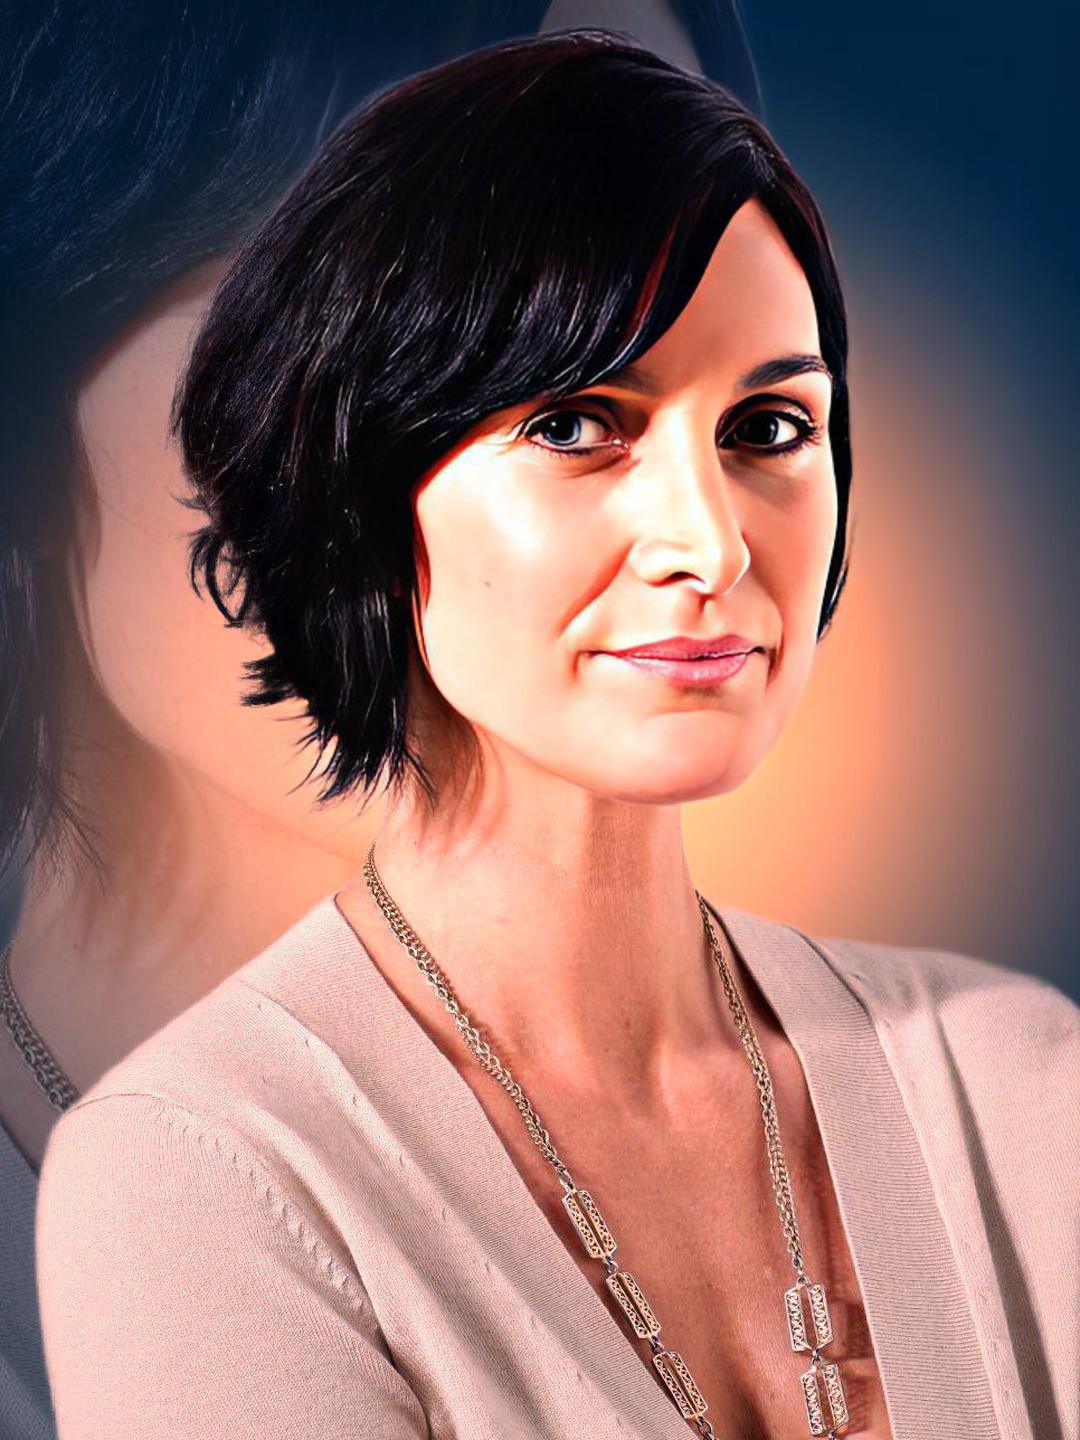 Massage Monalisa Sex Video - Carrie-Anne Moss - Celeb ART - Beautiful Artworks of Celebrities,  Footballers, Politicians and Famous People in World | OpenSea